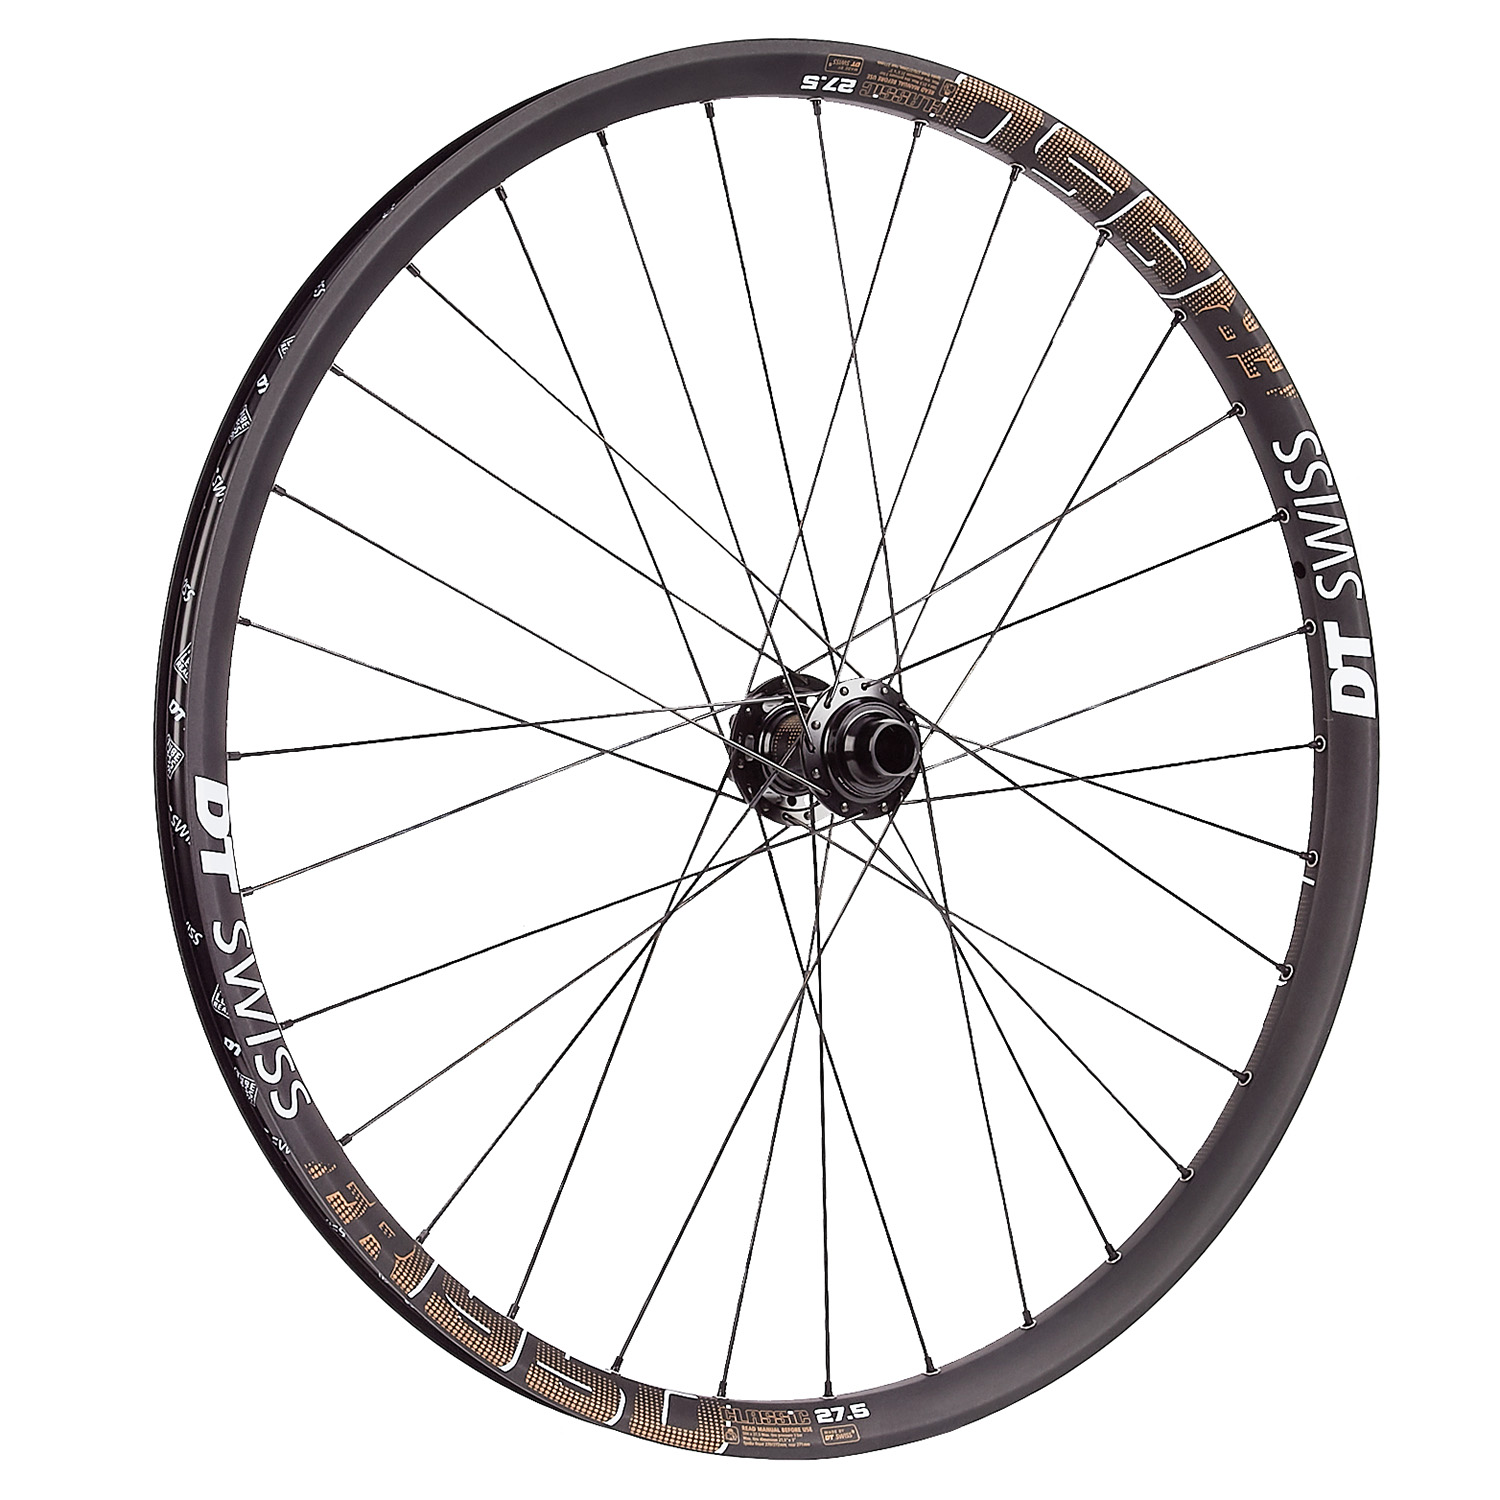 DT Swiss Wheel FR 1950 Classic Front, 27.5 Inches, 110x20 mm, Tubeless Ready